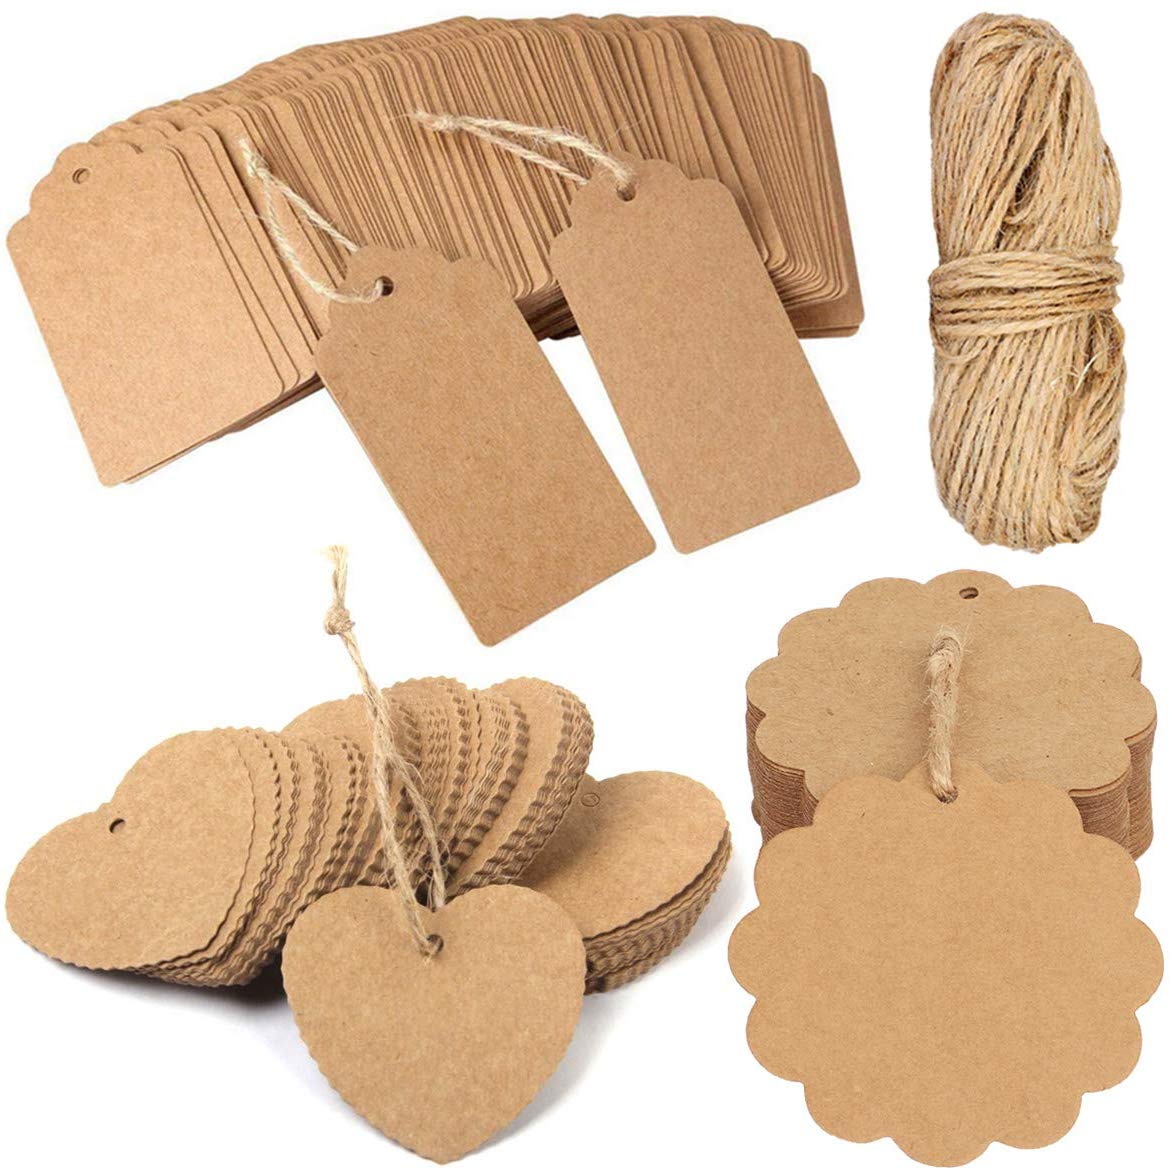 Gift Tags with Twine Blank Tags 180 Pieces Christmas Tags Vintage Kraft Paper Tags,Brown Tags Hang Labels Crafts Wedding Favor Tags Bridal Shower Tags 3 Different Designs Decorative Tags